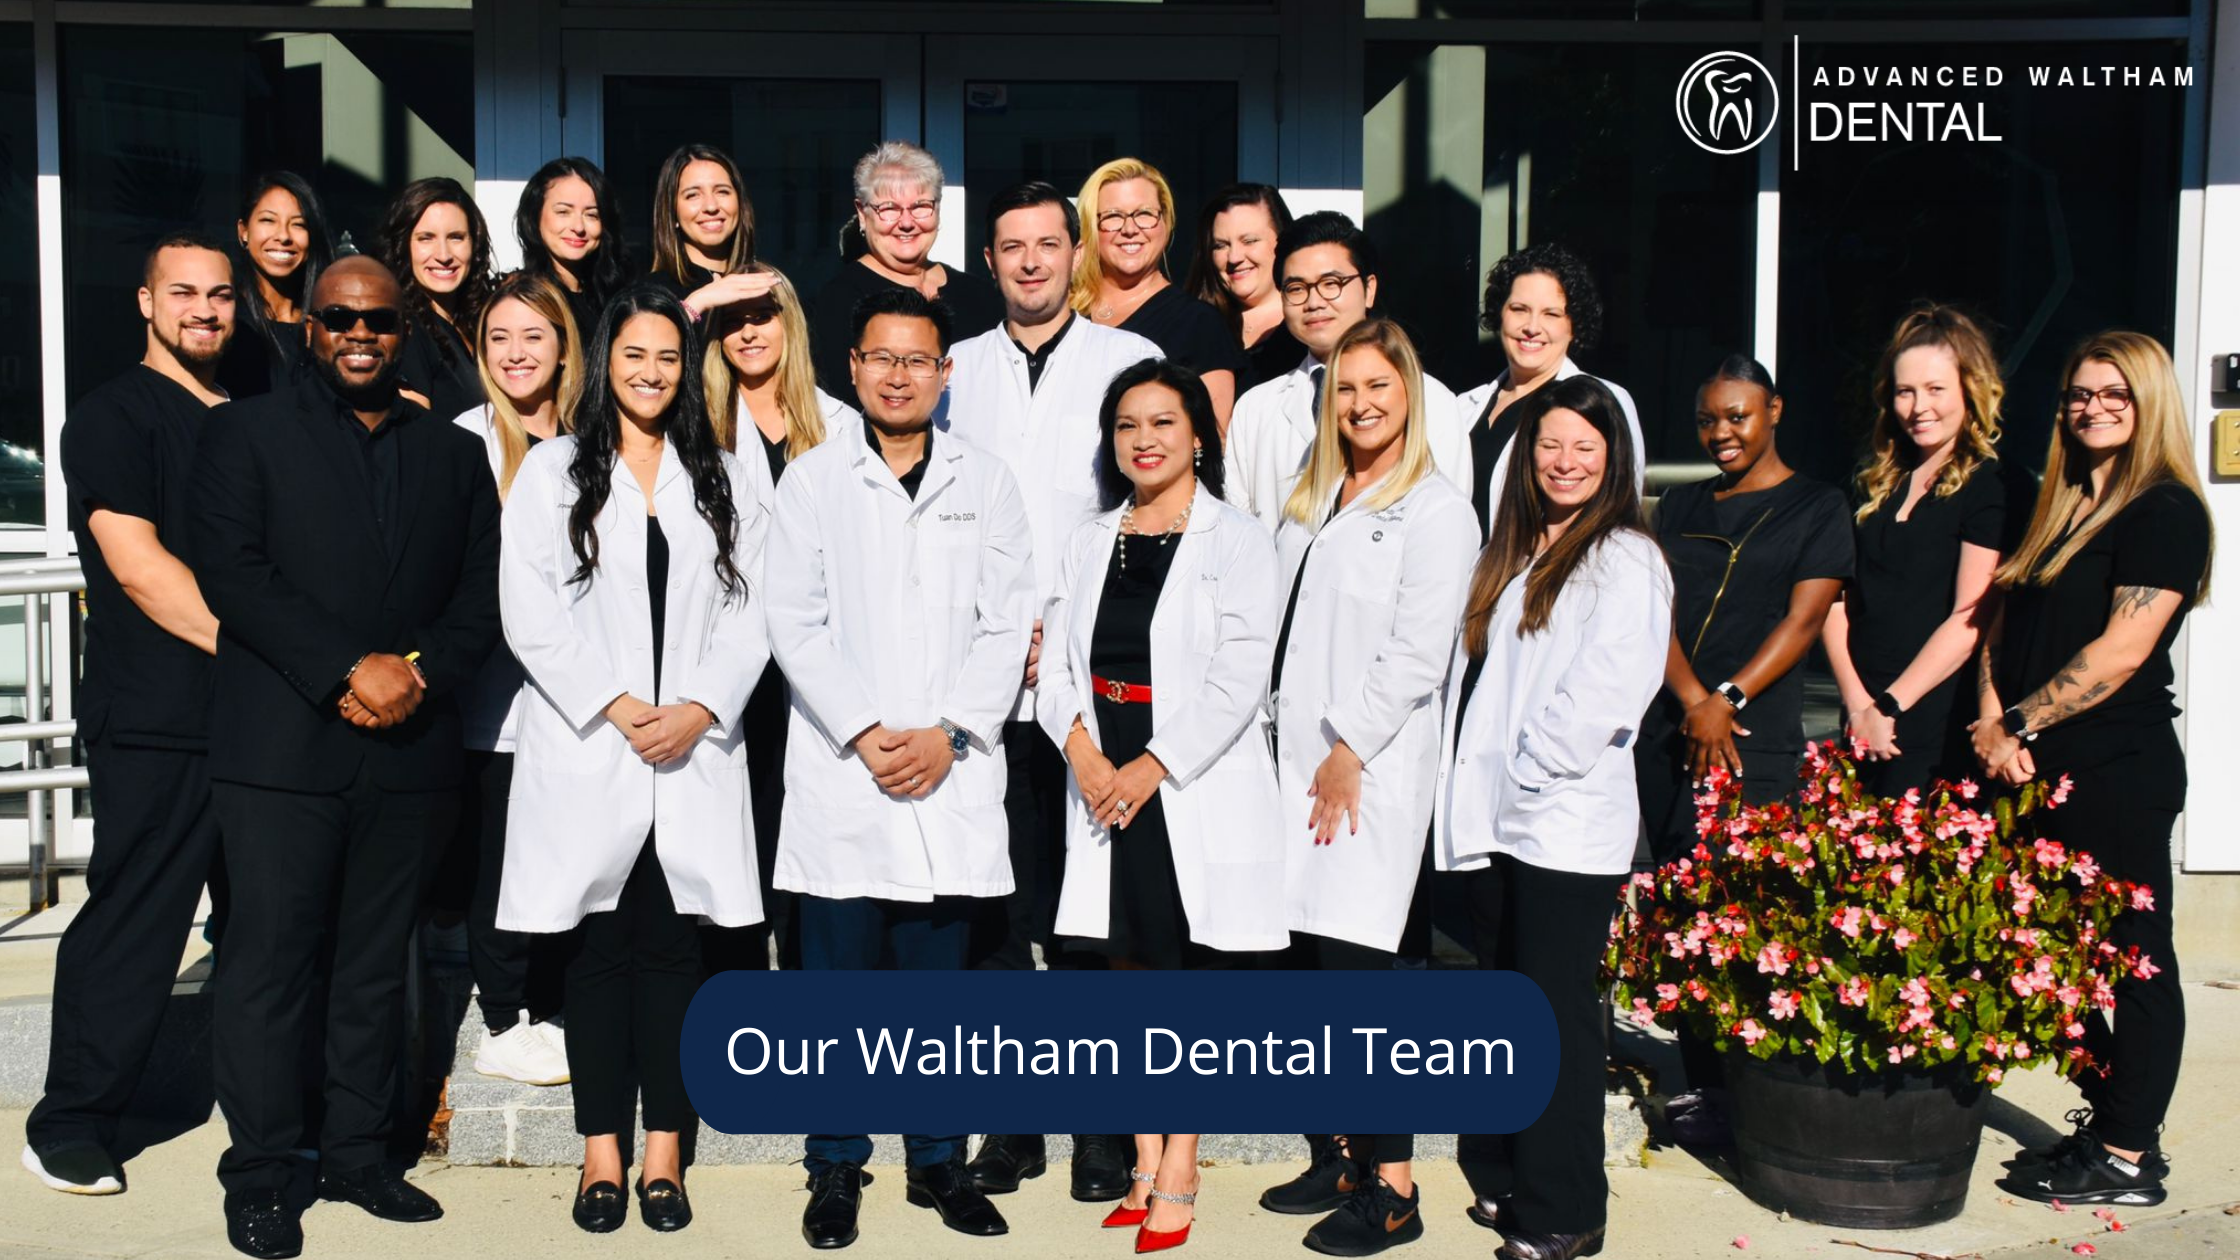 Staff and Dentists in Waltham MA